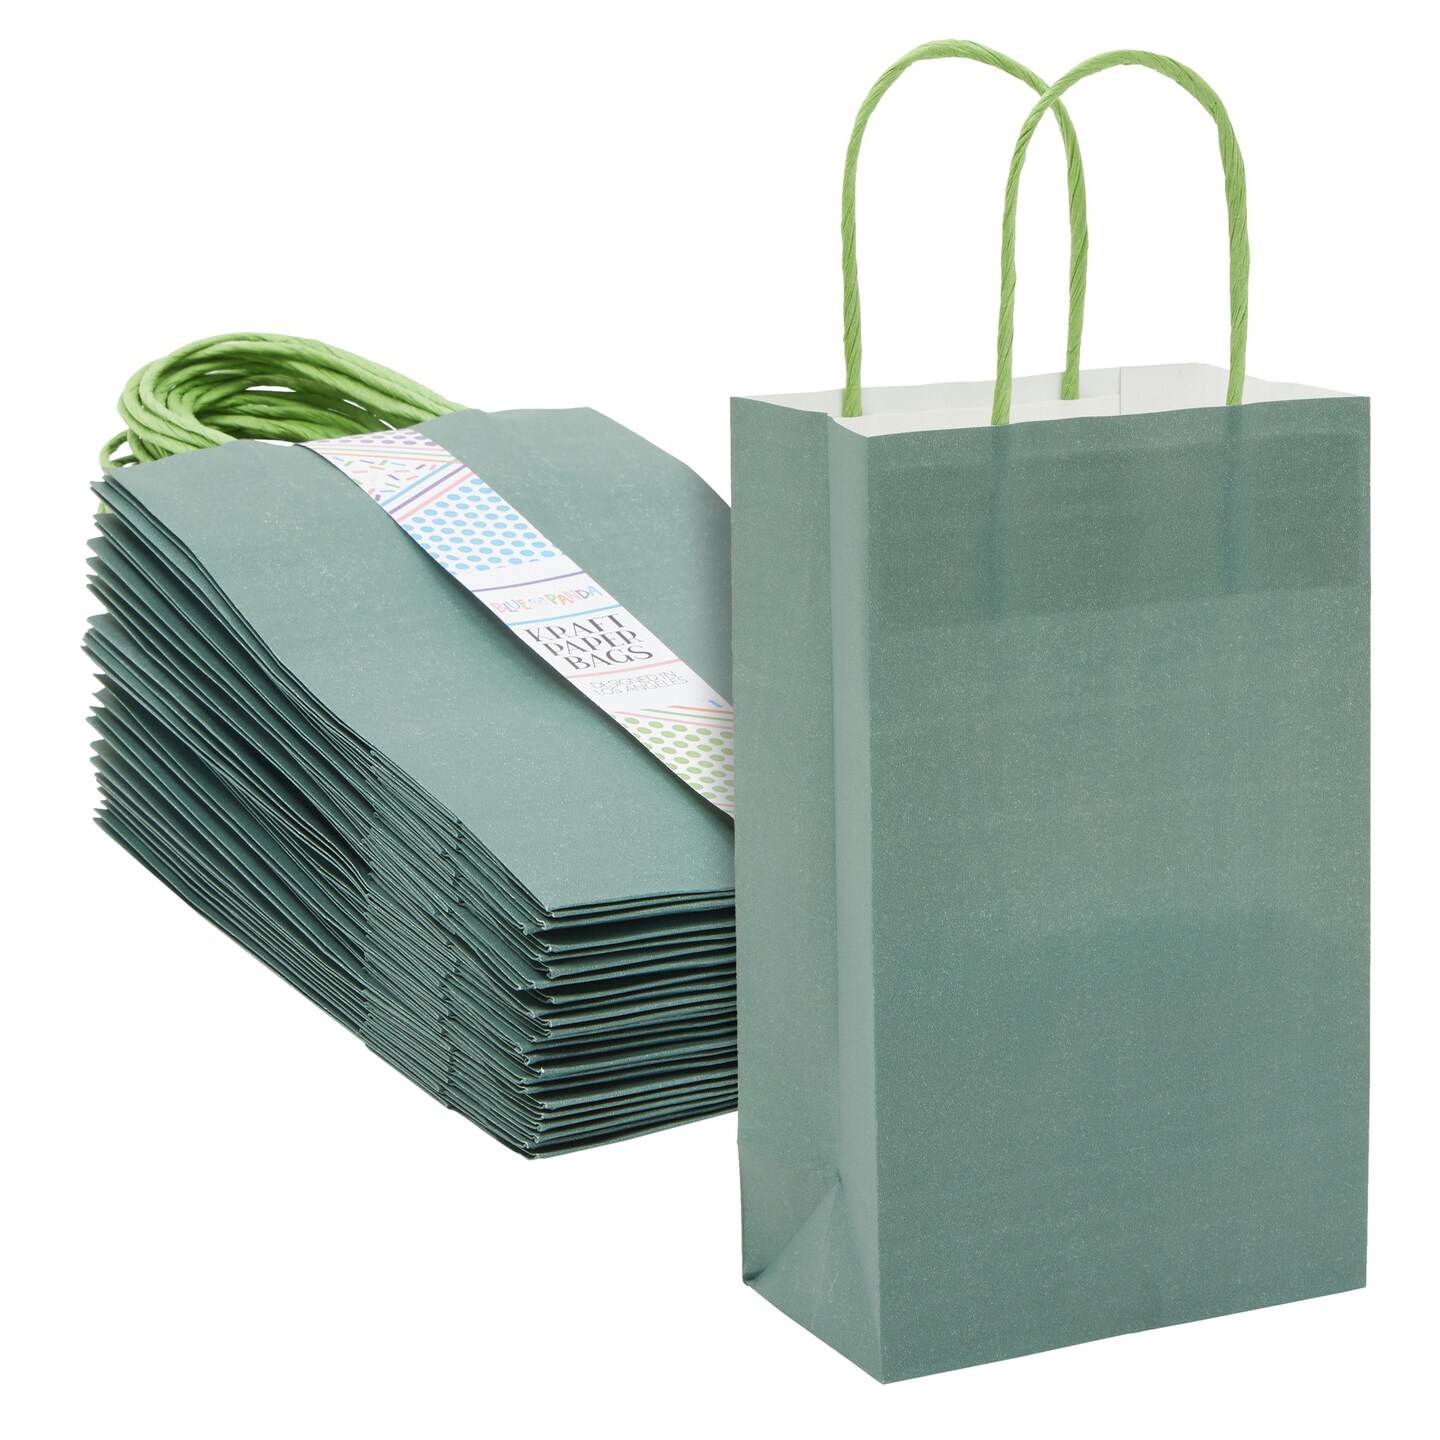 25-Pack Dark Green Gift Bags with Handles, 5.5x3.2x9-Inch Paper Goodie ...